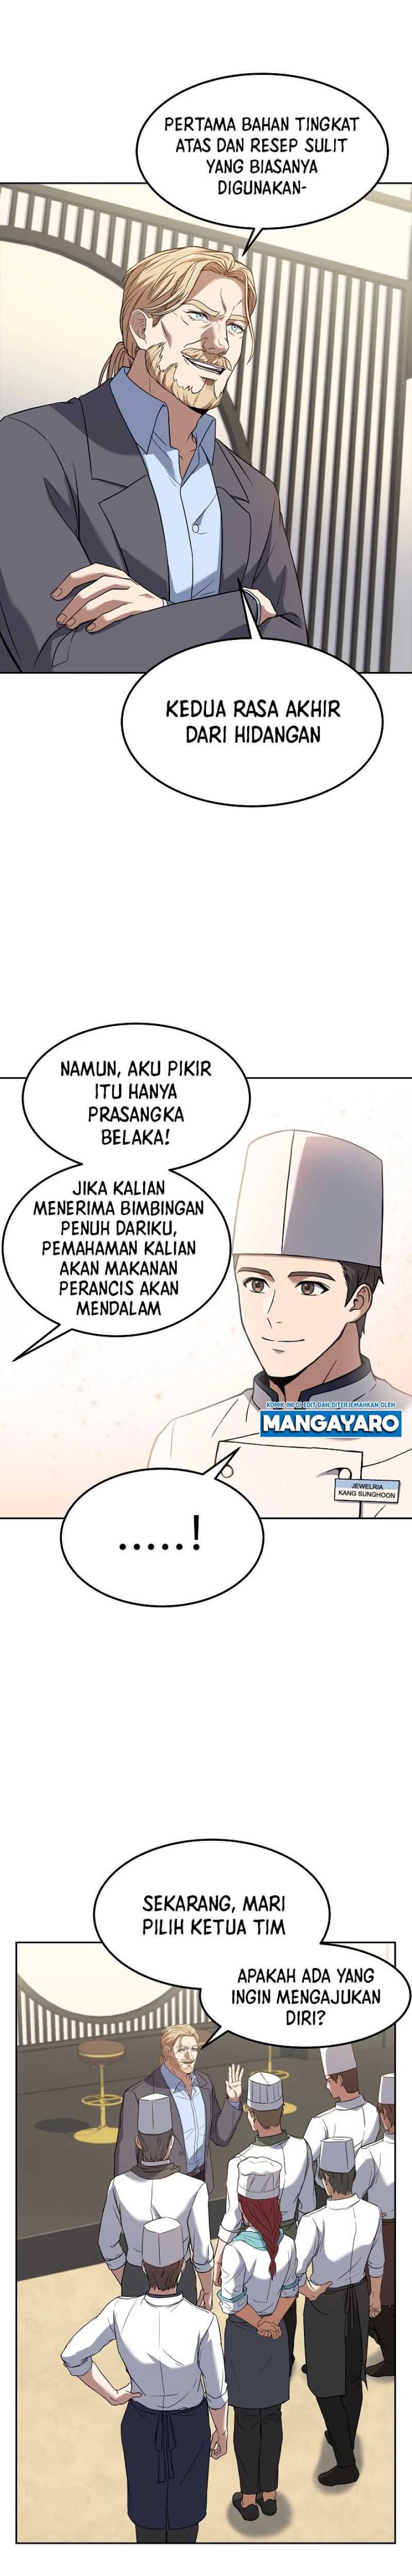 Youngest Chef From the 3rd Rate Hotel Chapter 44